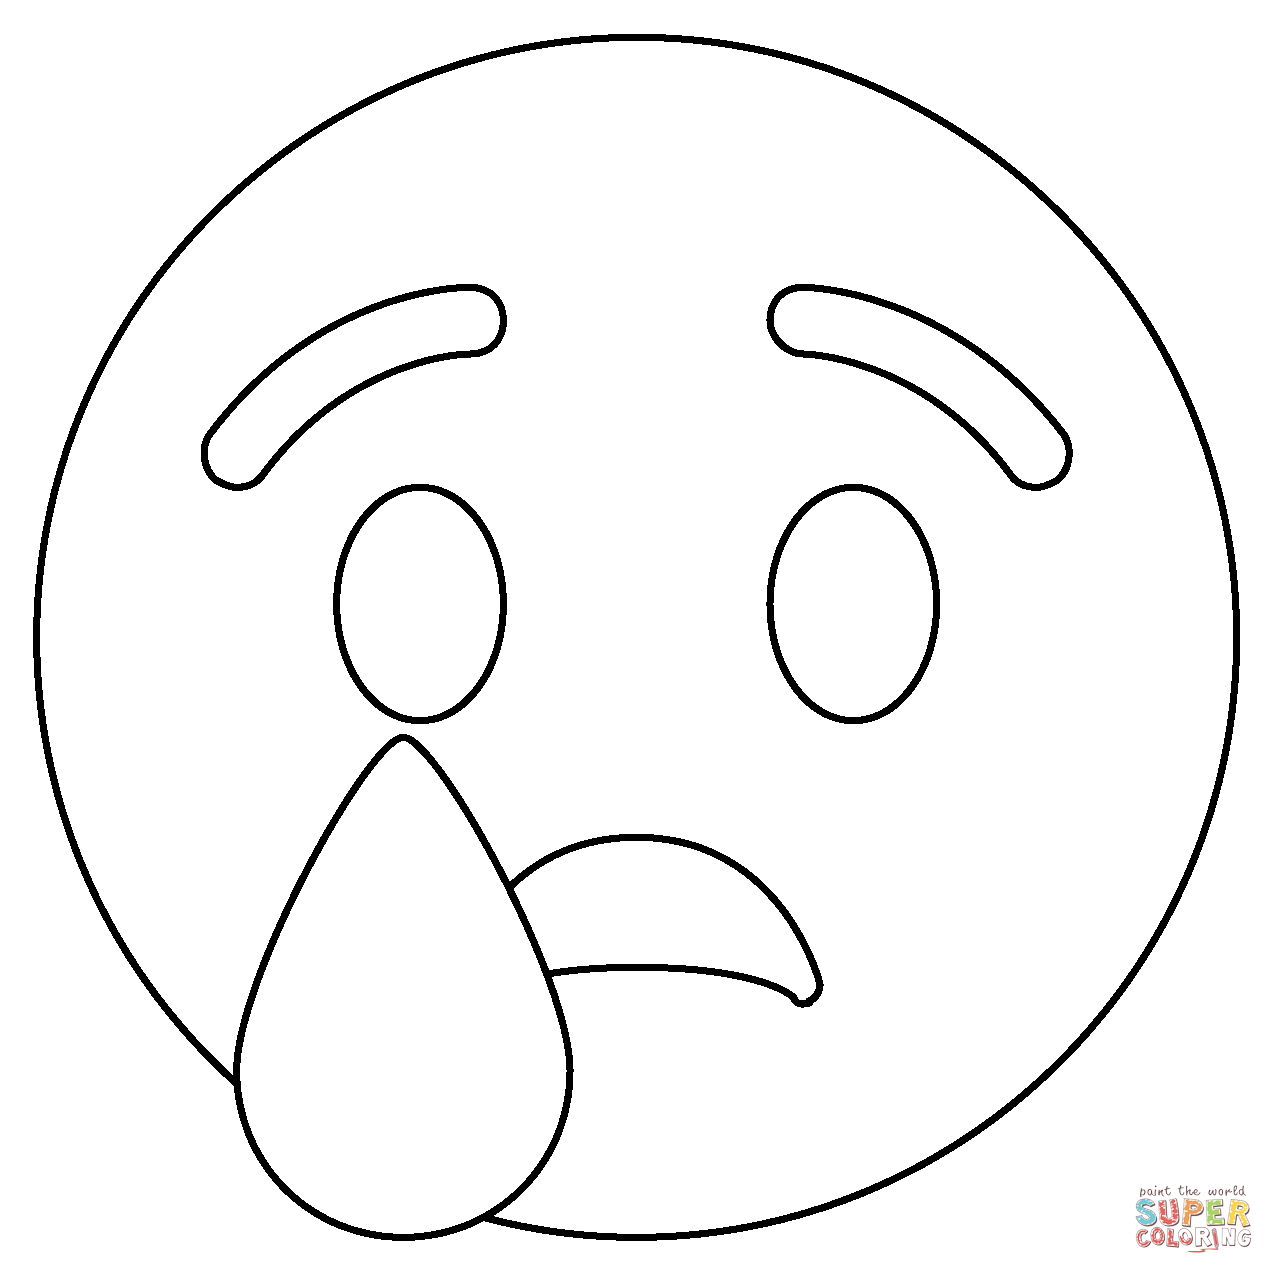 Crying face emoji coloring page free printable coloring pages